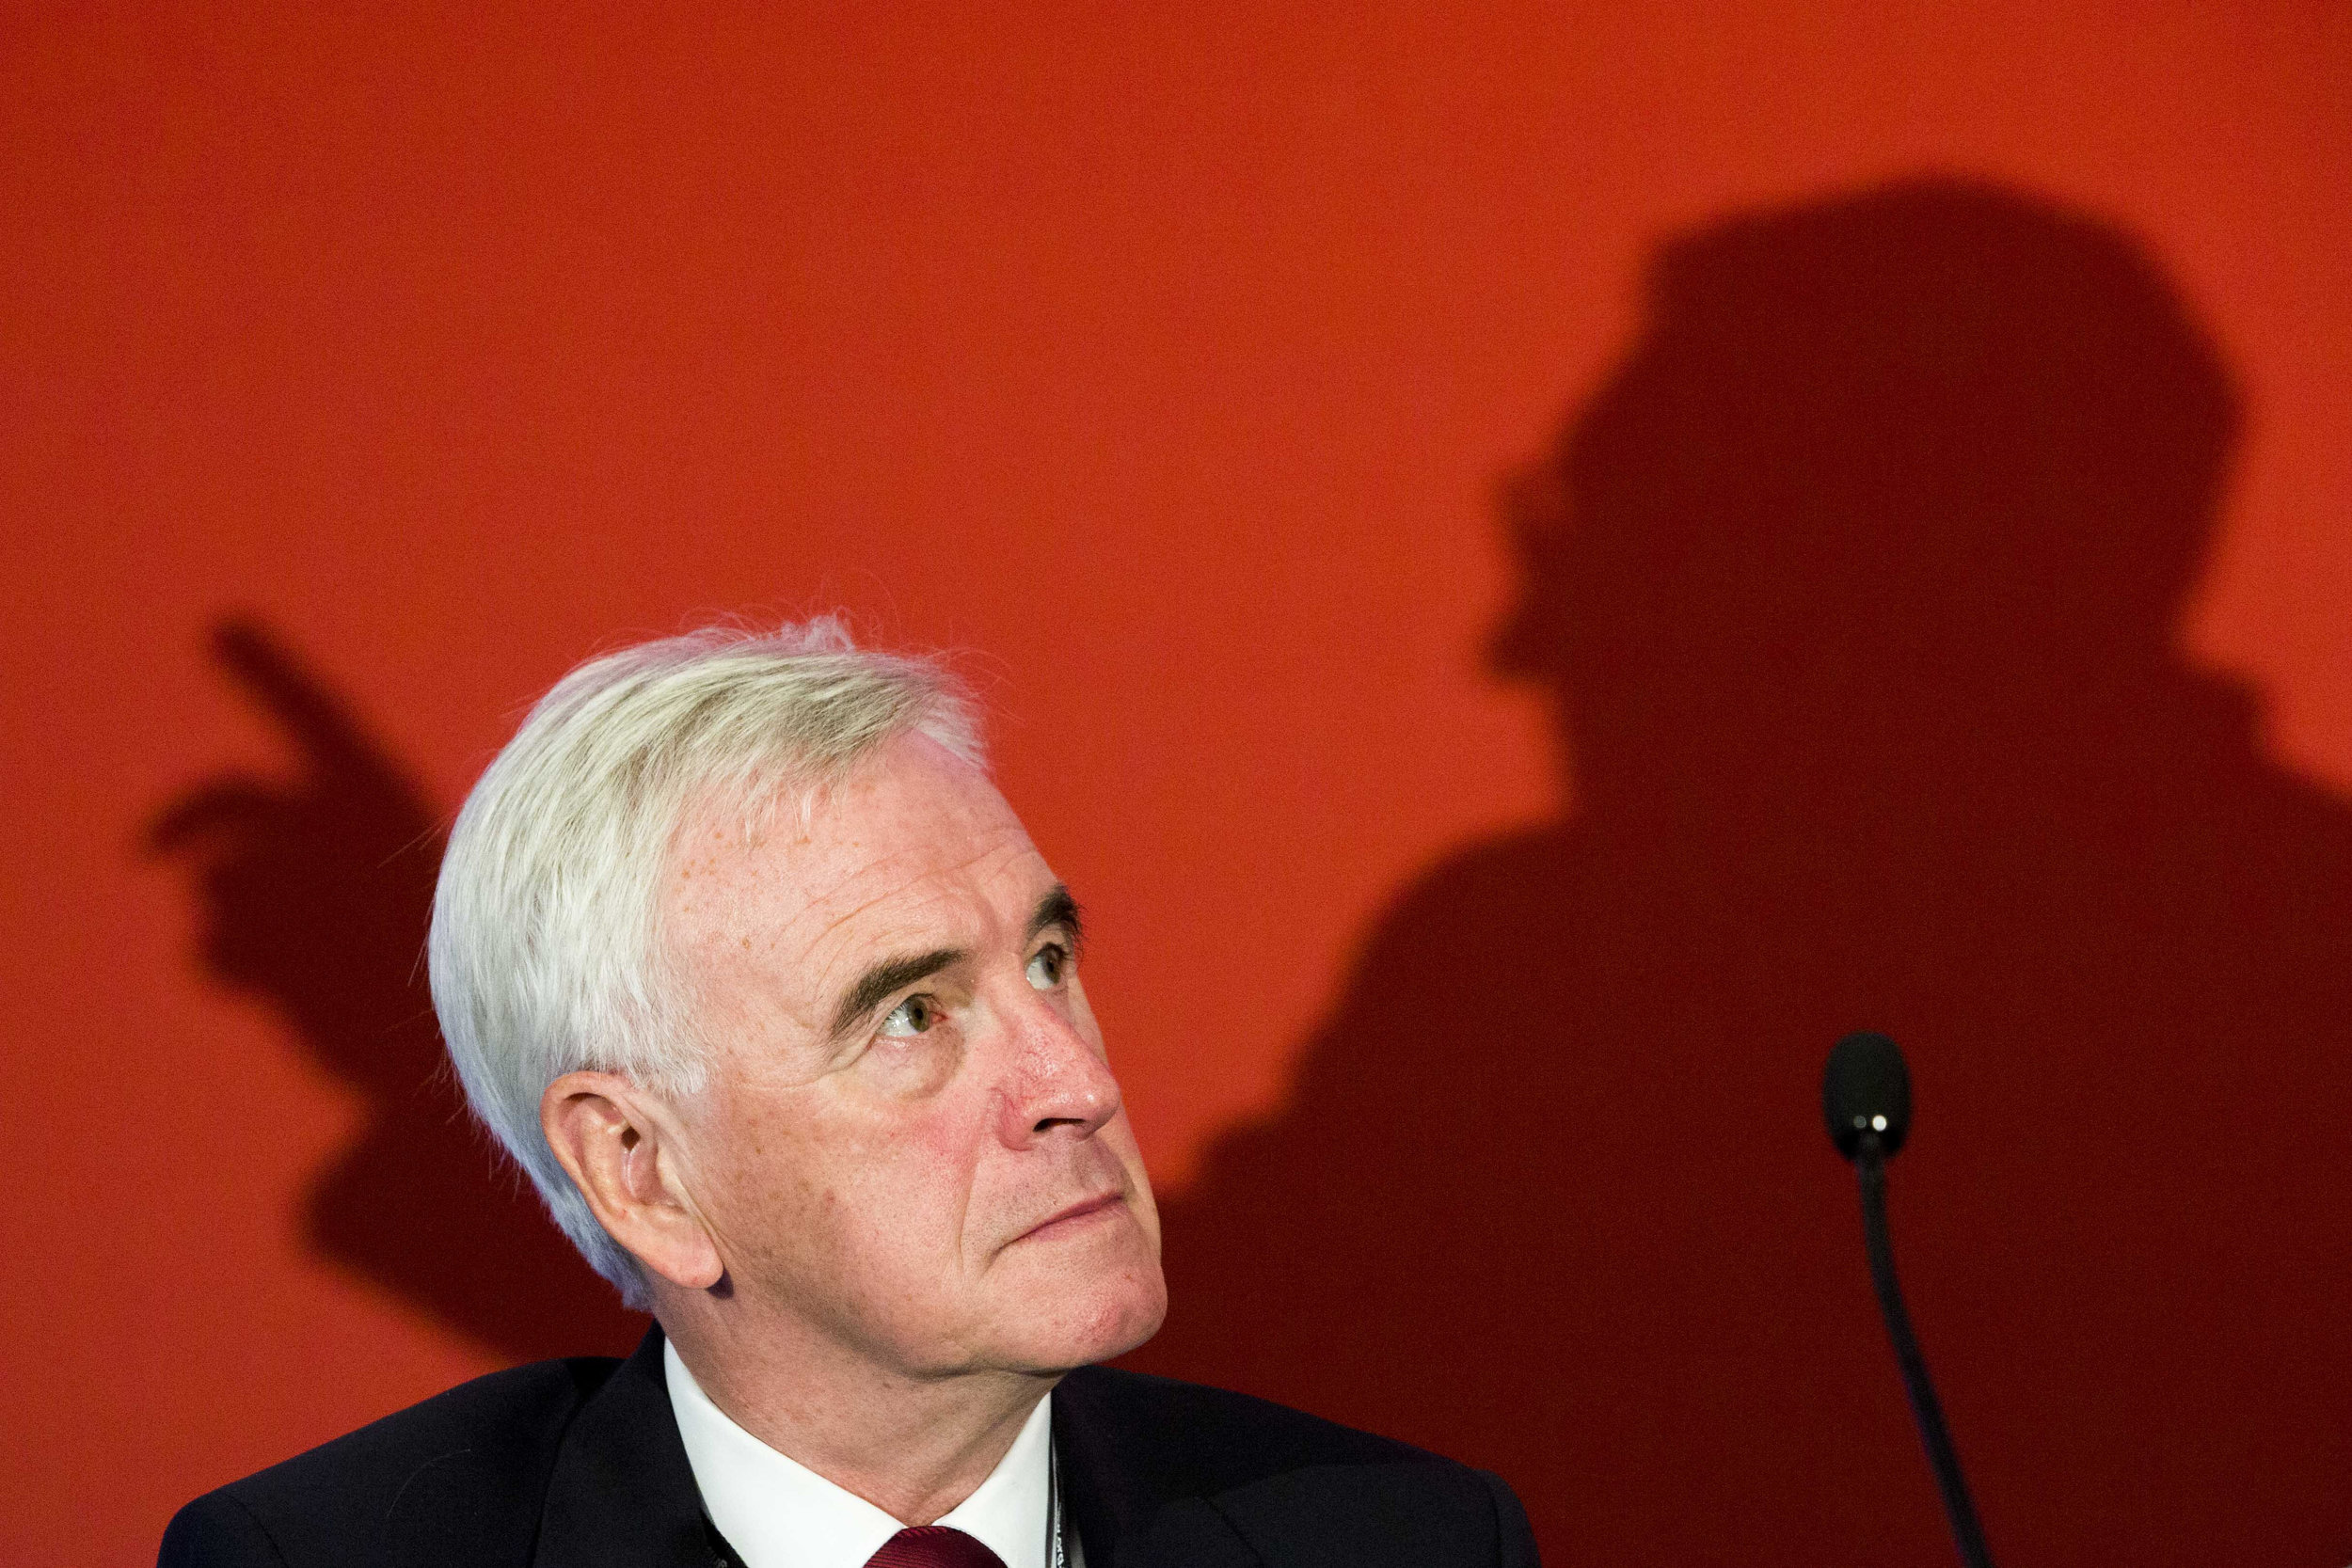  John McDonnell MP, Shadow Chancellor of The Exchequer, listens to Len McCluskey, General Secretary of UNITE, making a speech at a fringe meeting during Labour Party Conference in Liverpool.
Photo by Chris Bull, 23 September 2018
 